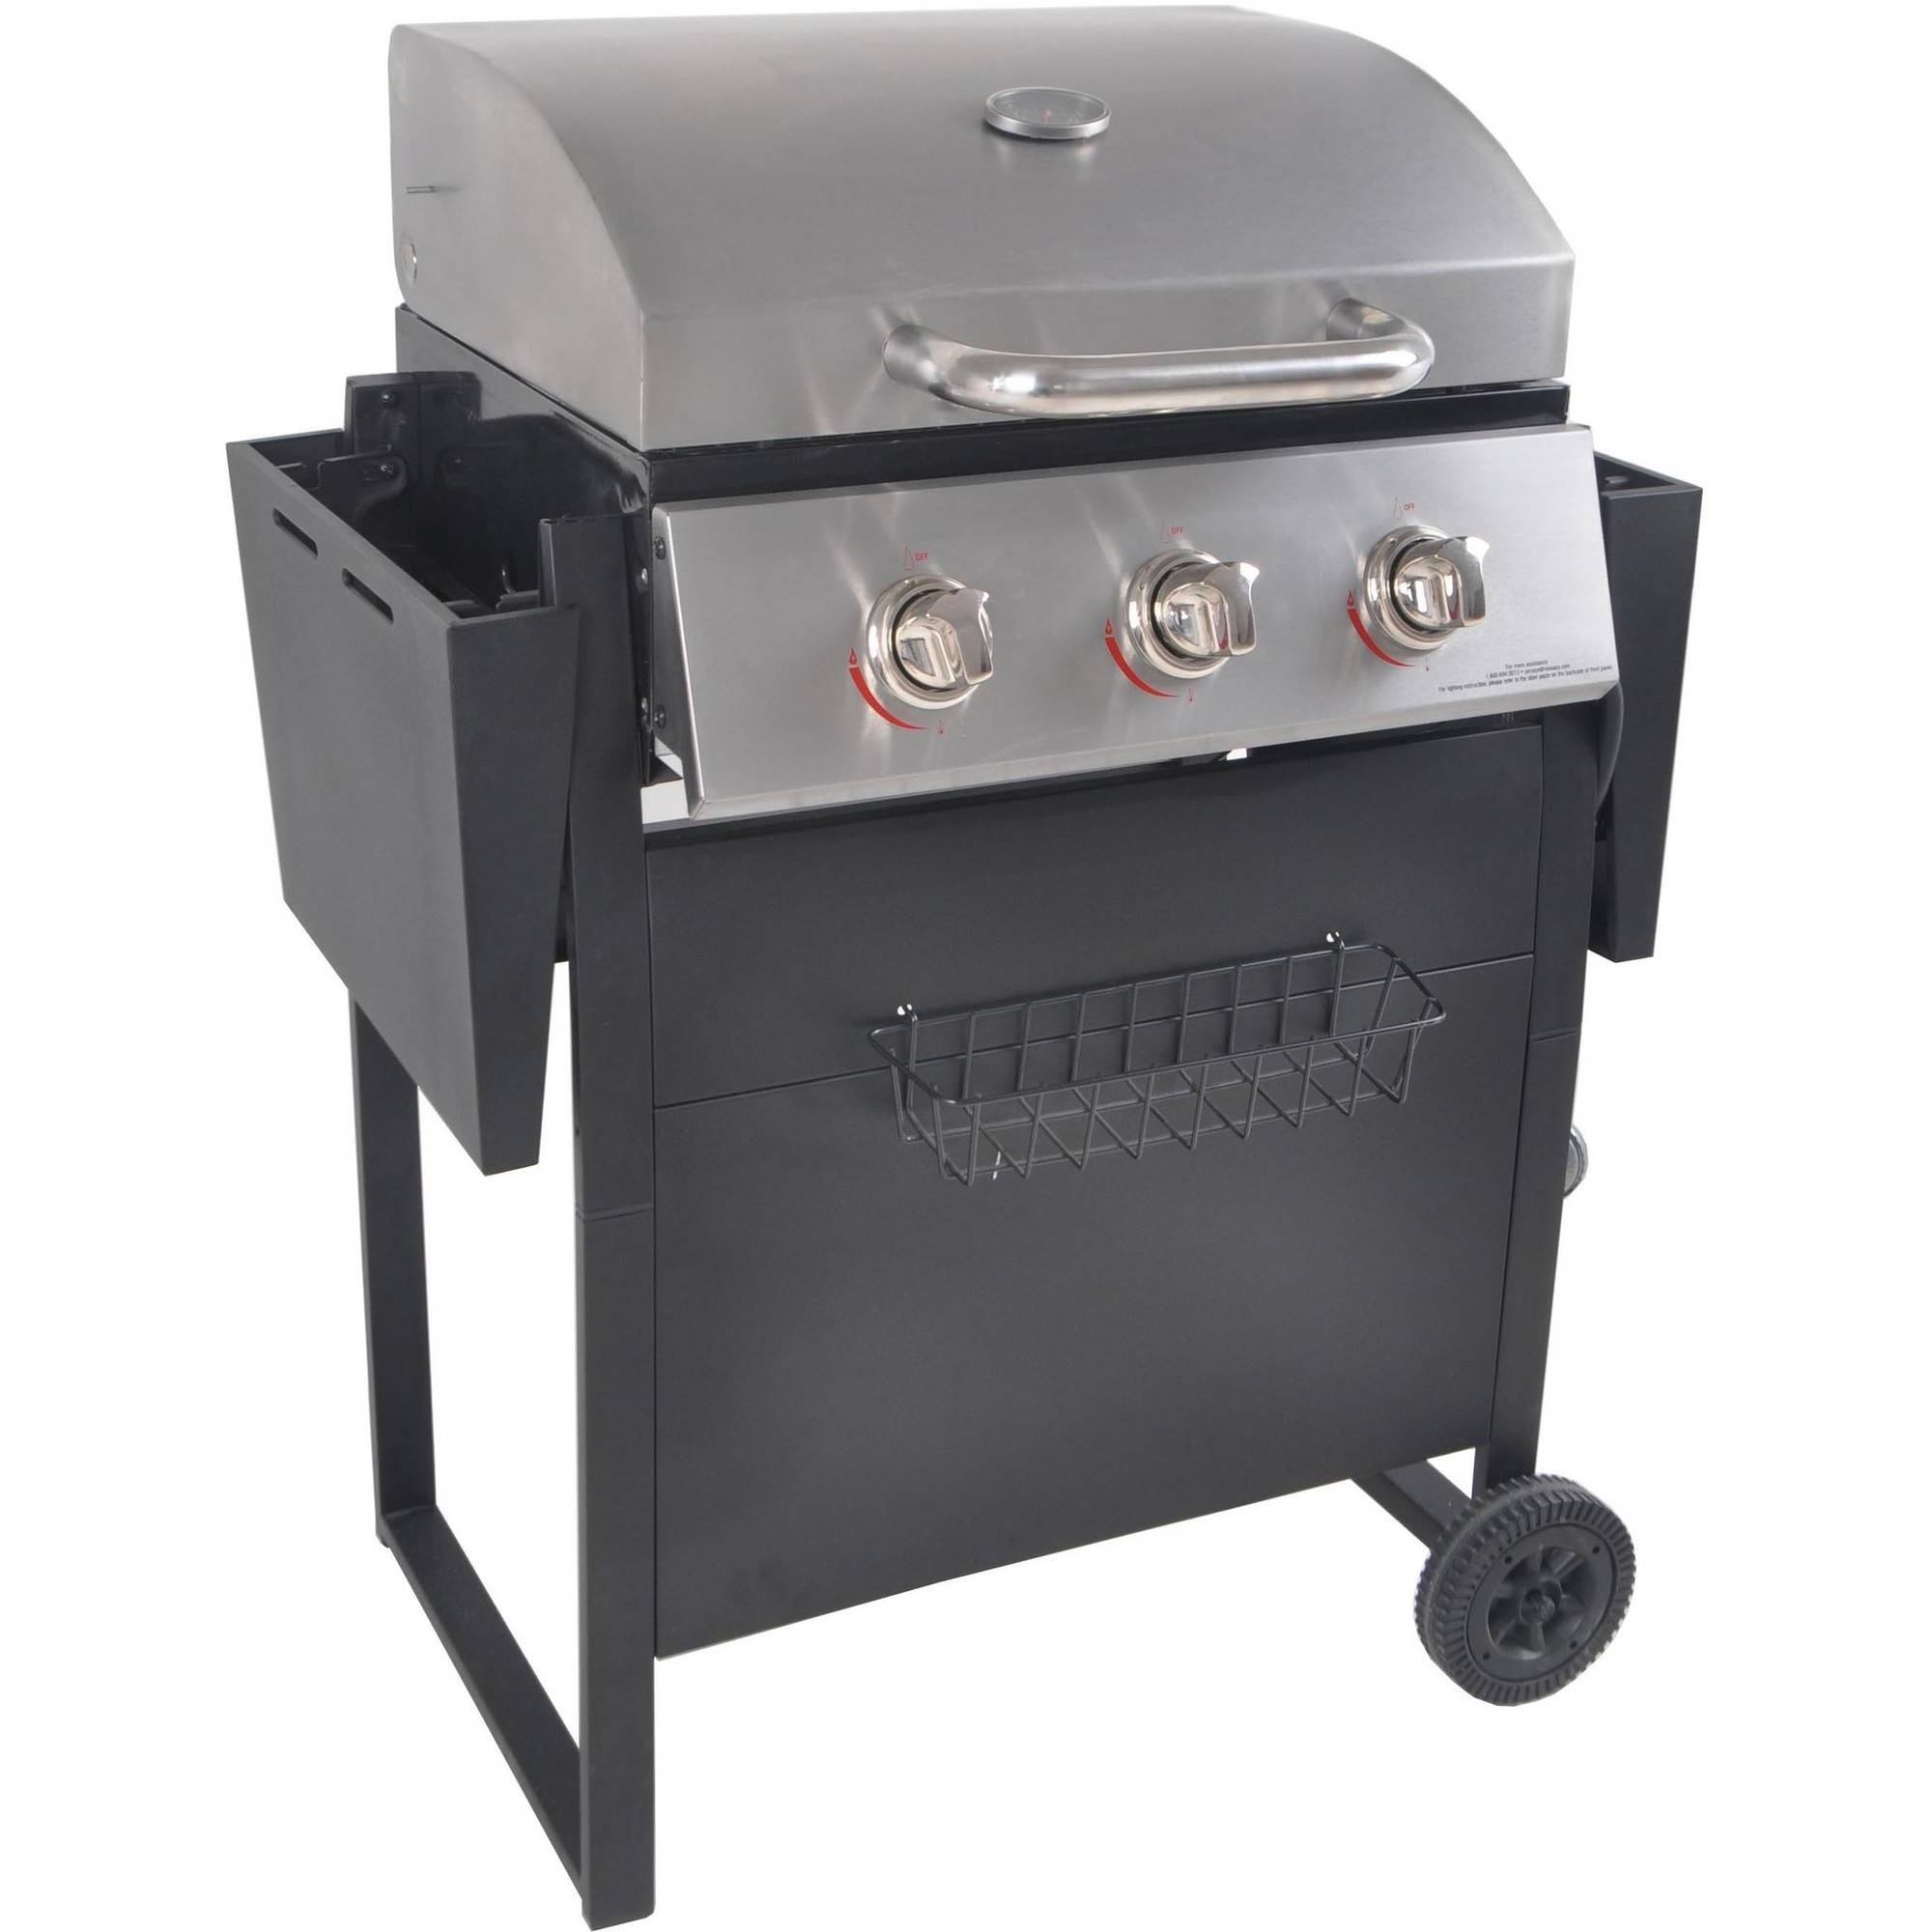 RevoAce 3-Burner Space Saver Propane Gas Grill, Stainless and Black, GBC1706W - image 2 of 11